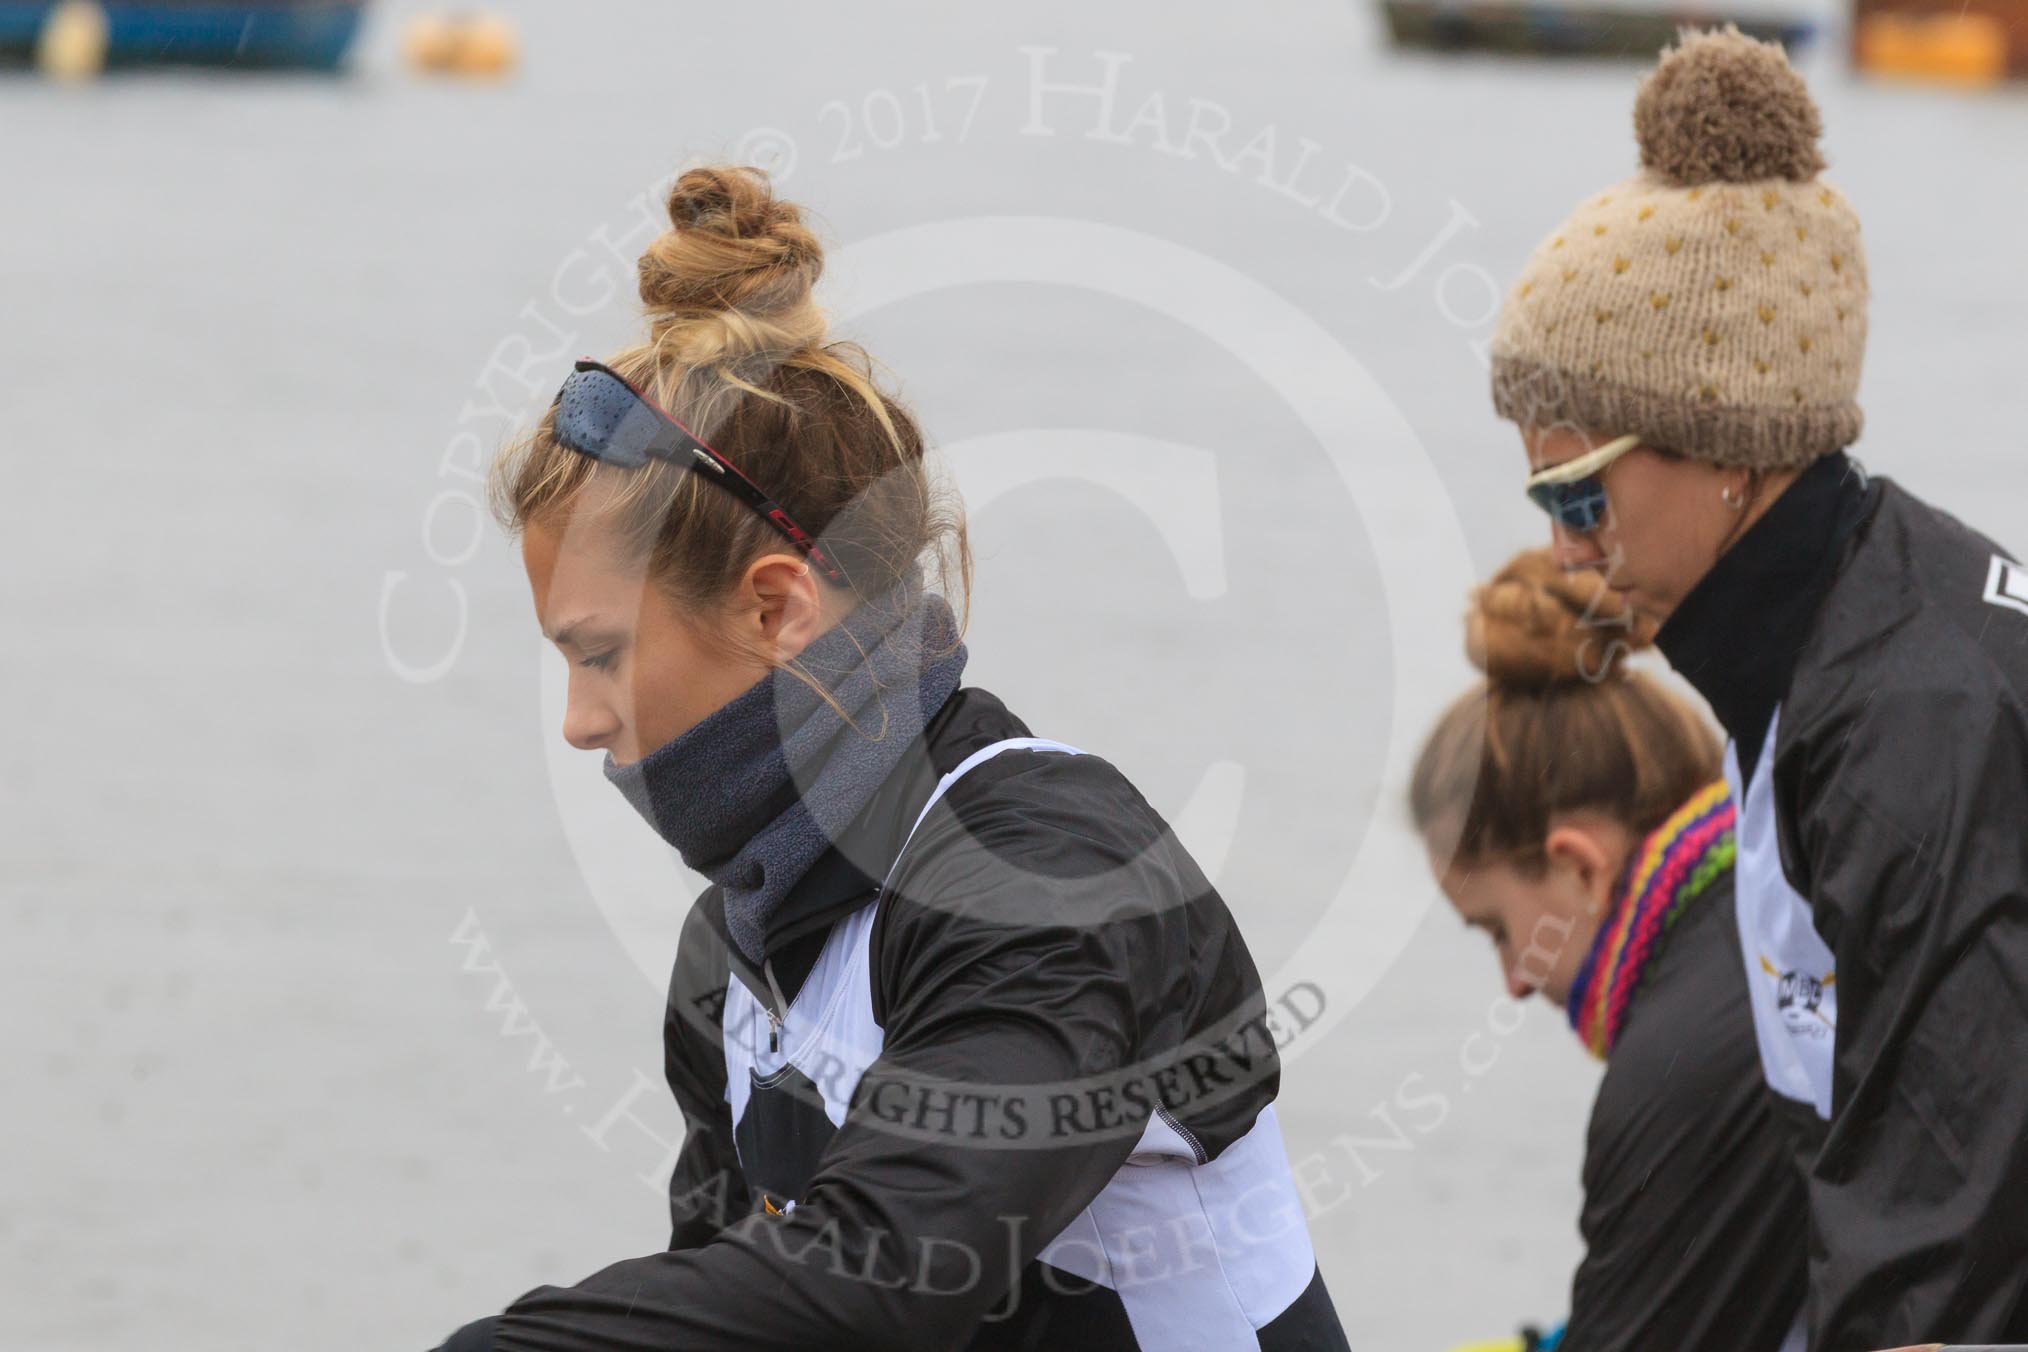 The Women's Boat Race season 2018 - fixture OUWBC vs. Molesey BC: Molesey's 6 seat Molly Harding, 5 seat Ruth Whyman, and 4 Claire McKeown.
River Thames between Putney Bridge and Mortlake,
London SW15,

United Kingdom,
on 04 March 2018 at 13:08, image #11